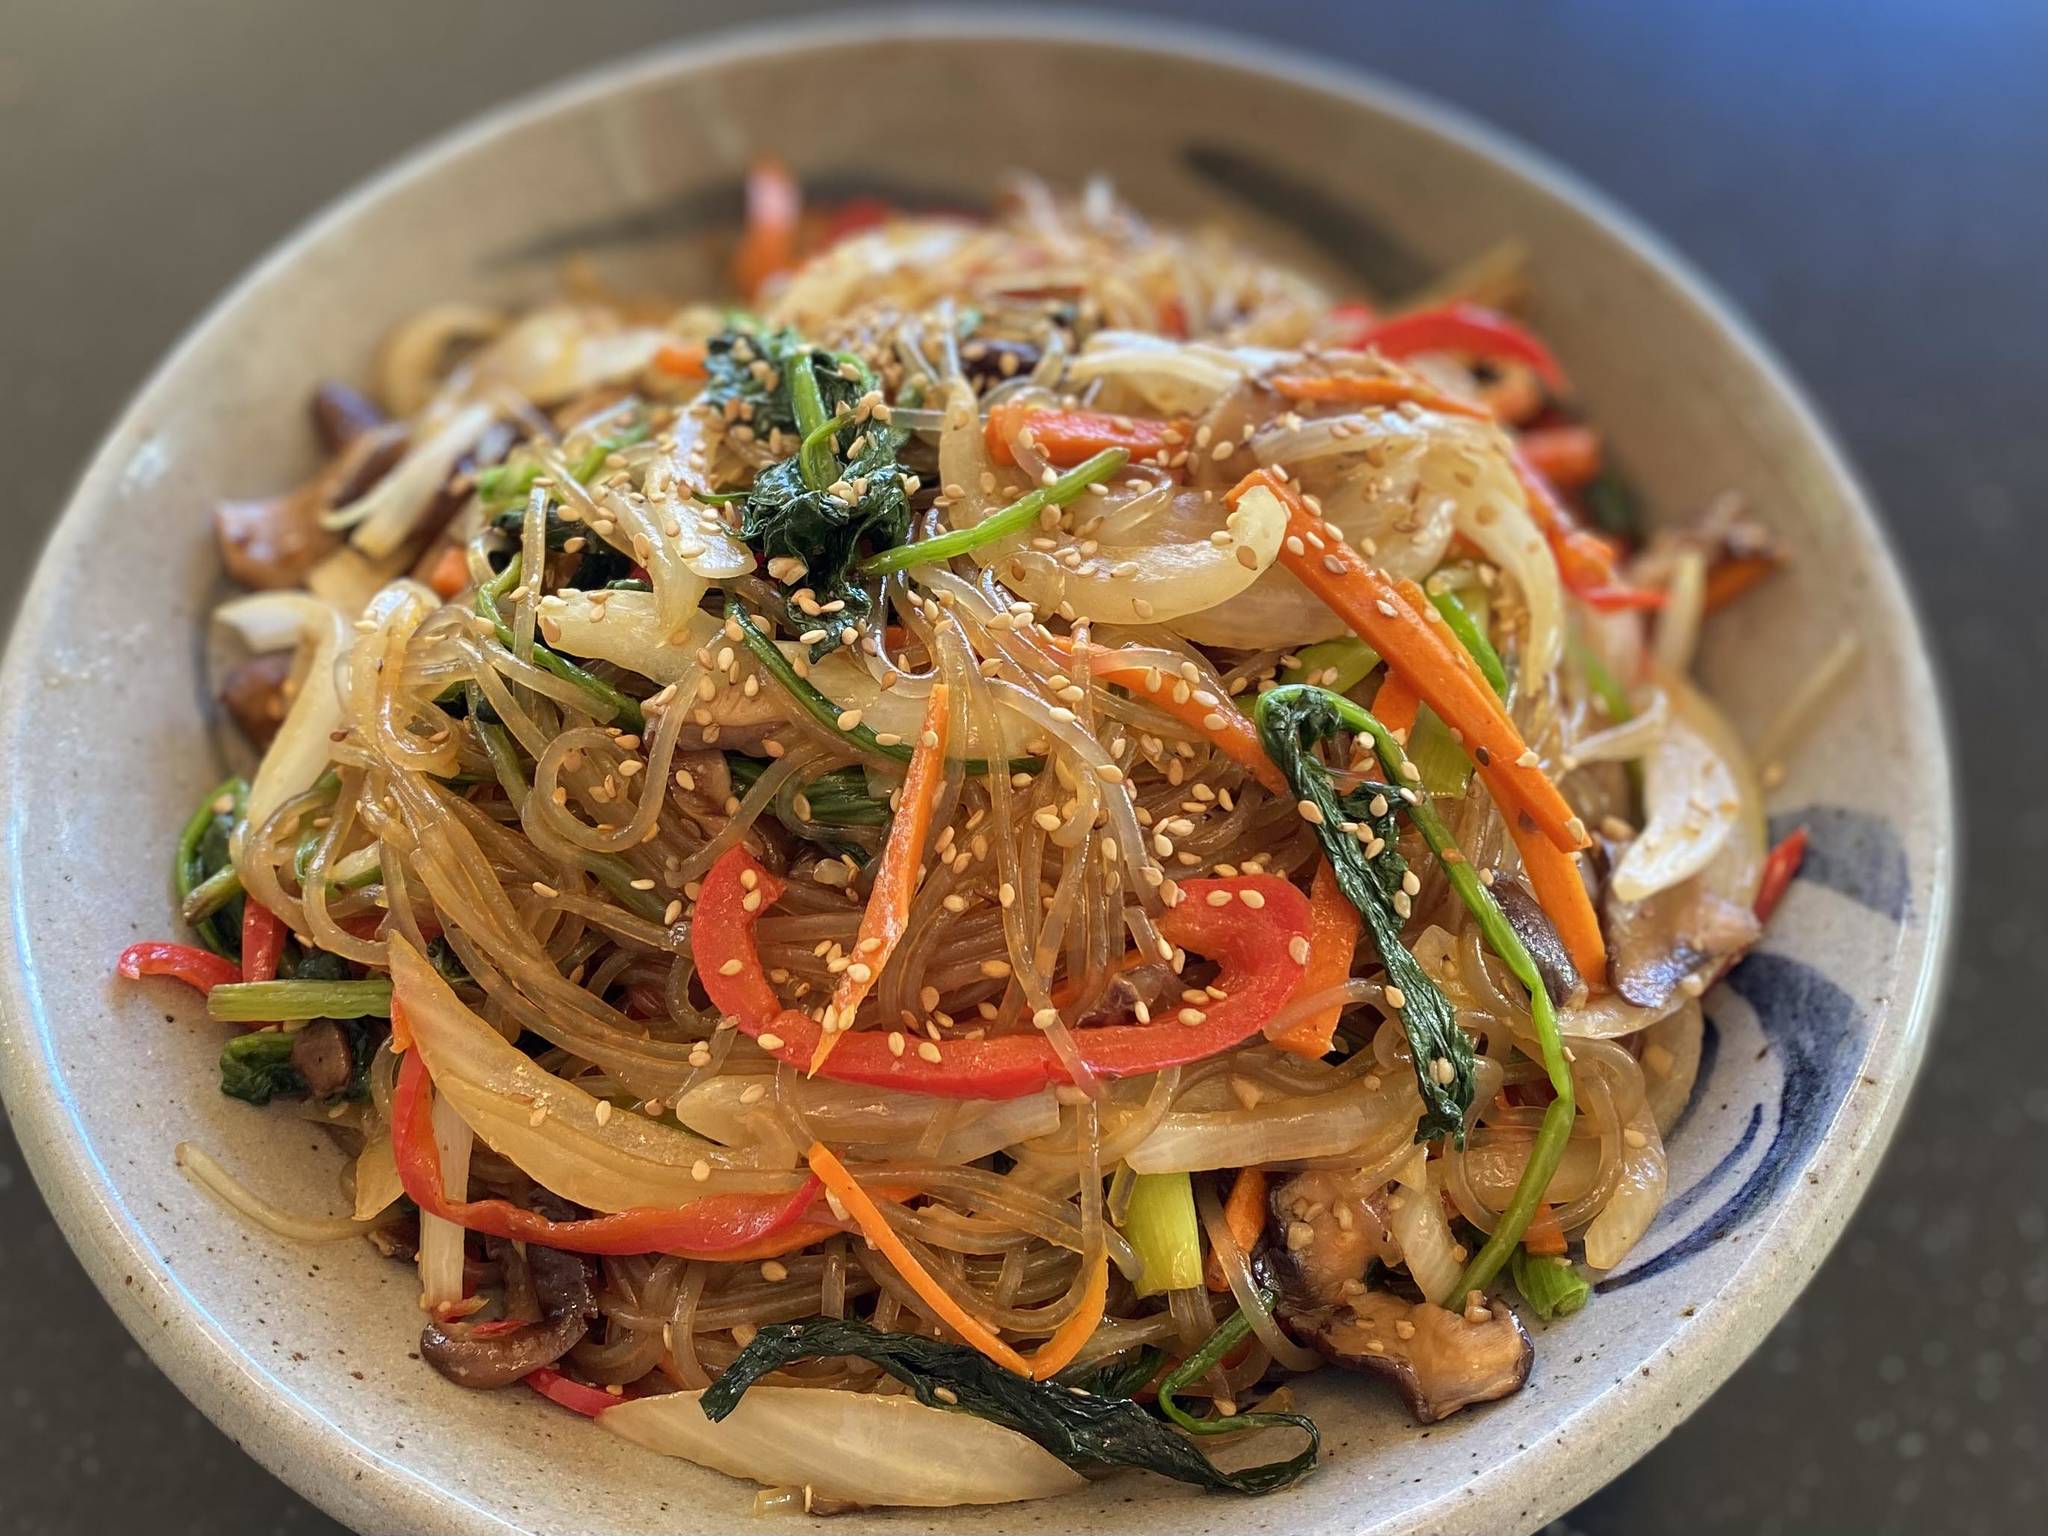 Containing onions, carrots, shitake mushrooms and noodles Japchae is a stir-fried Korean vegetable and noodle dish that is delectable hot, cold and everywhere in between. (Photo by Tressa Dale/Peninsula Clarion)